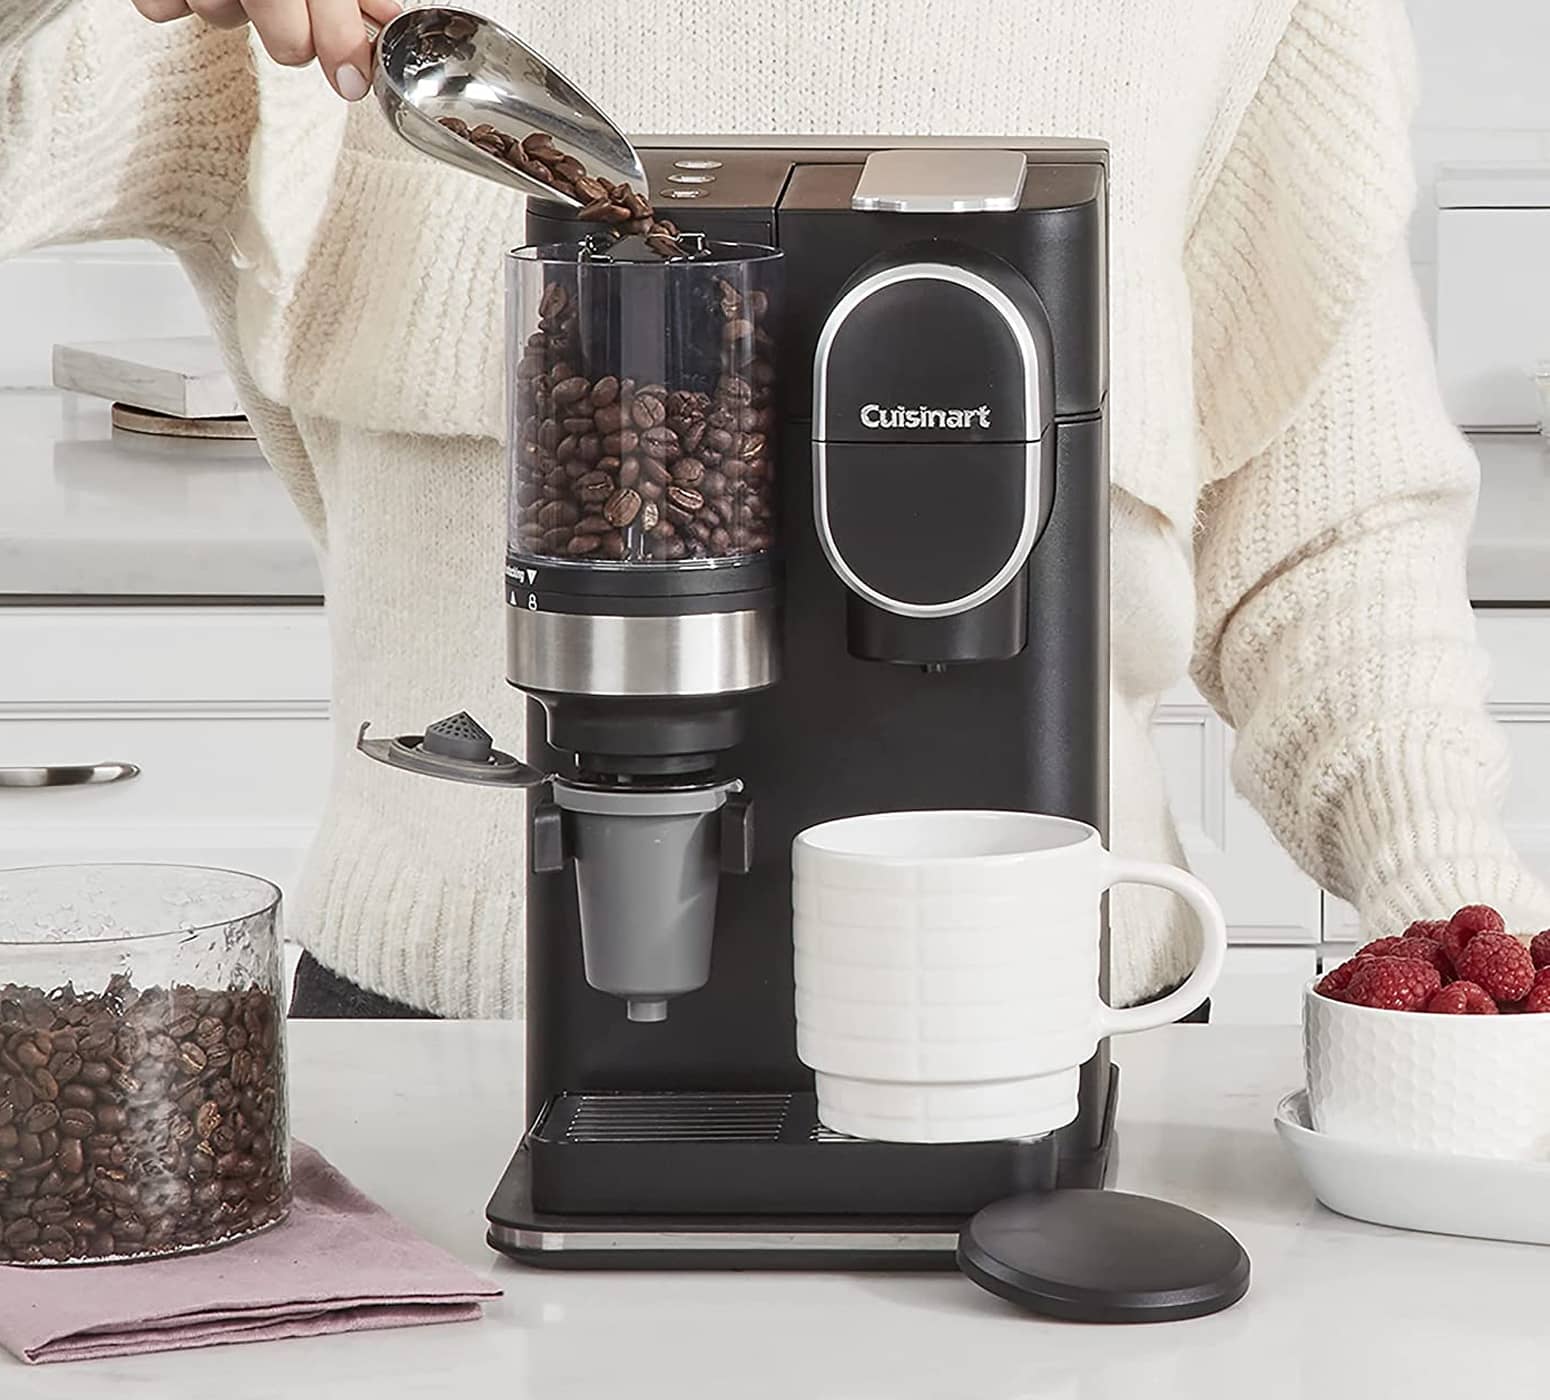 Cuisinart Grind and Brew Single-Serve Coffee Maker